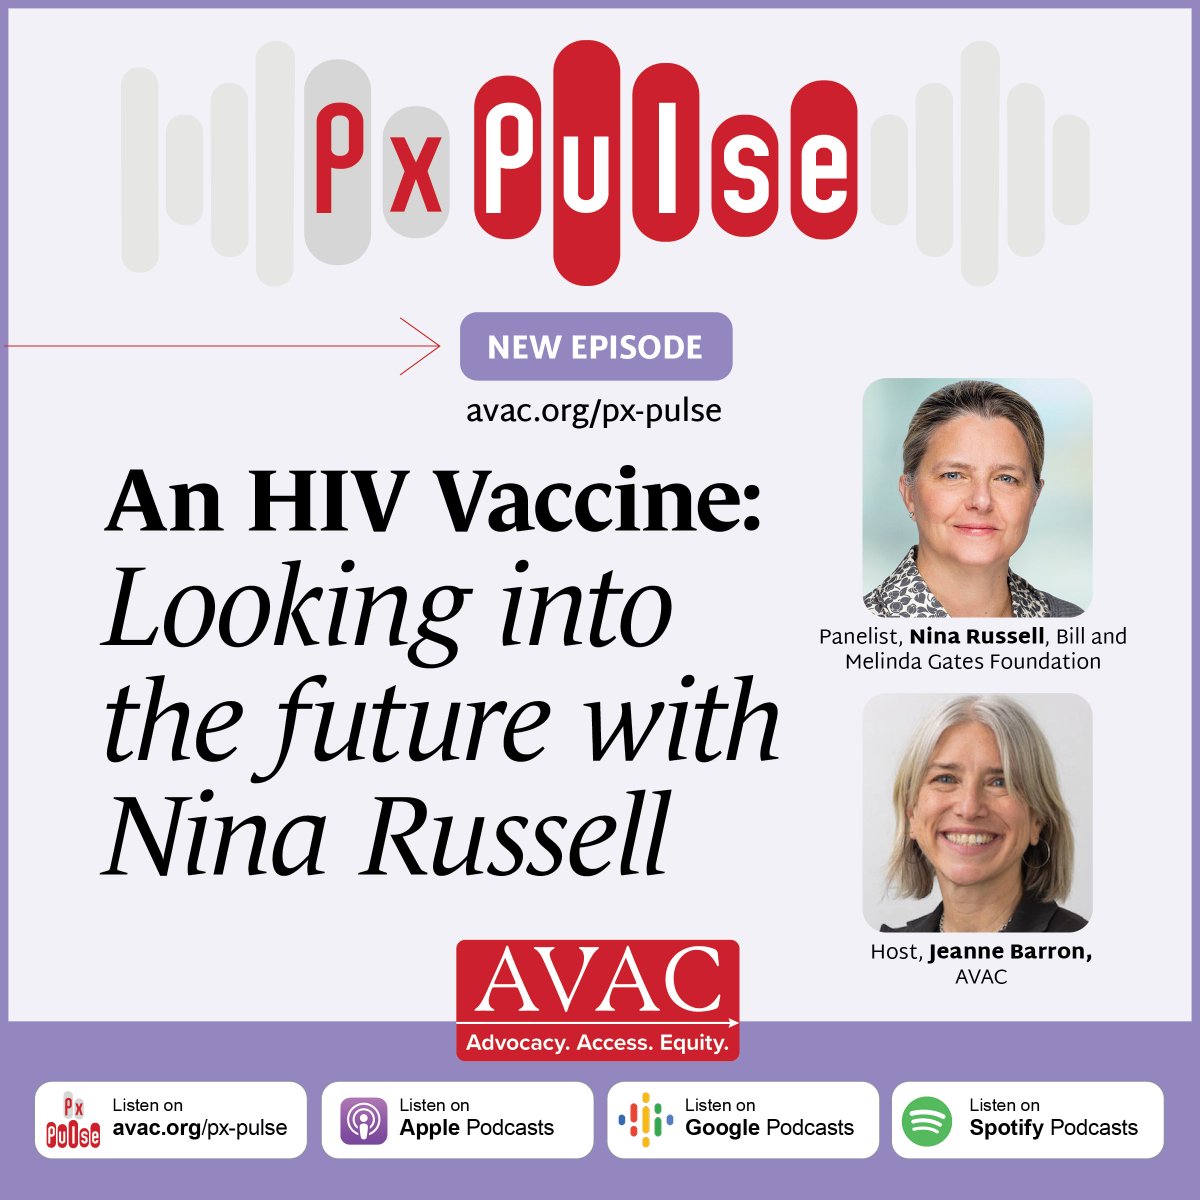 As HIV Vaccine Awareness Day approaches, #PxPulse sits with @NinaRussellMD of @gatesfoundation to discuss the future of HIV vaccine research, and why sustained investment and advocacy are needed to expand our HIV prevention toolbox. #HVAD avac.org/resource/an-hi…